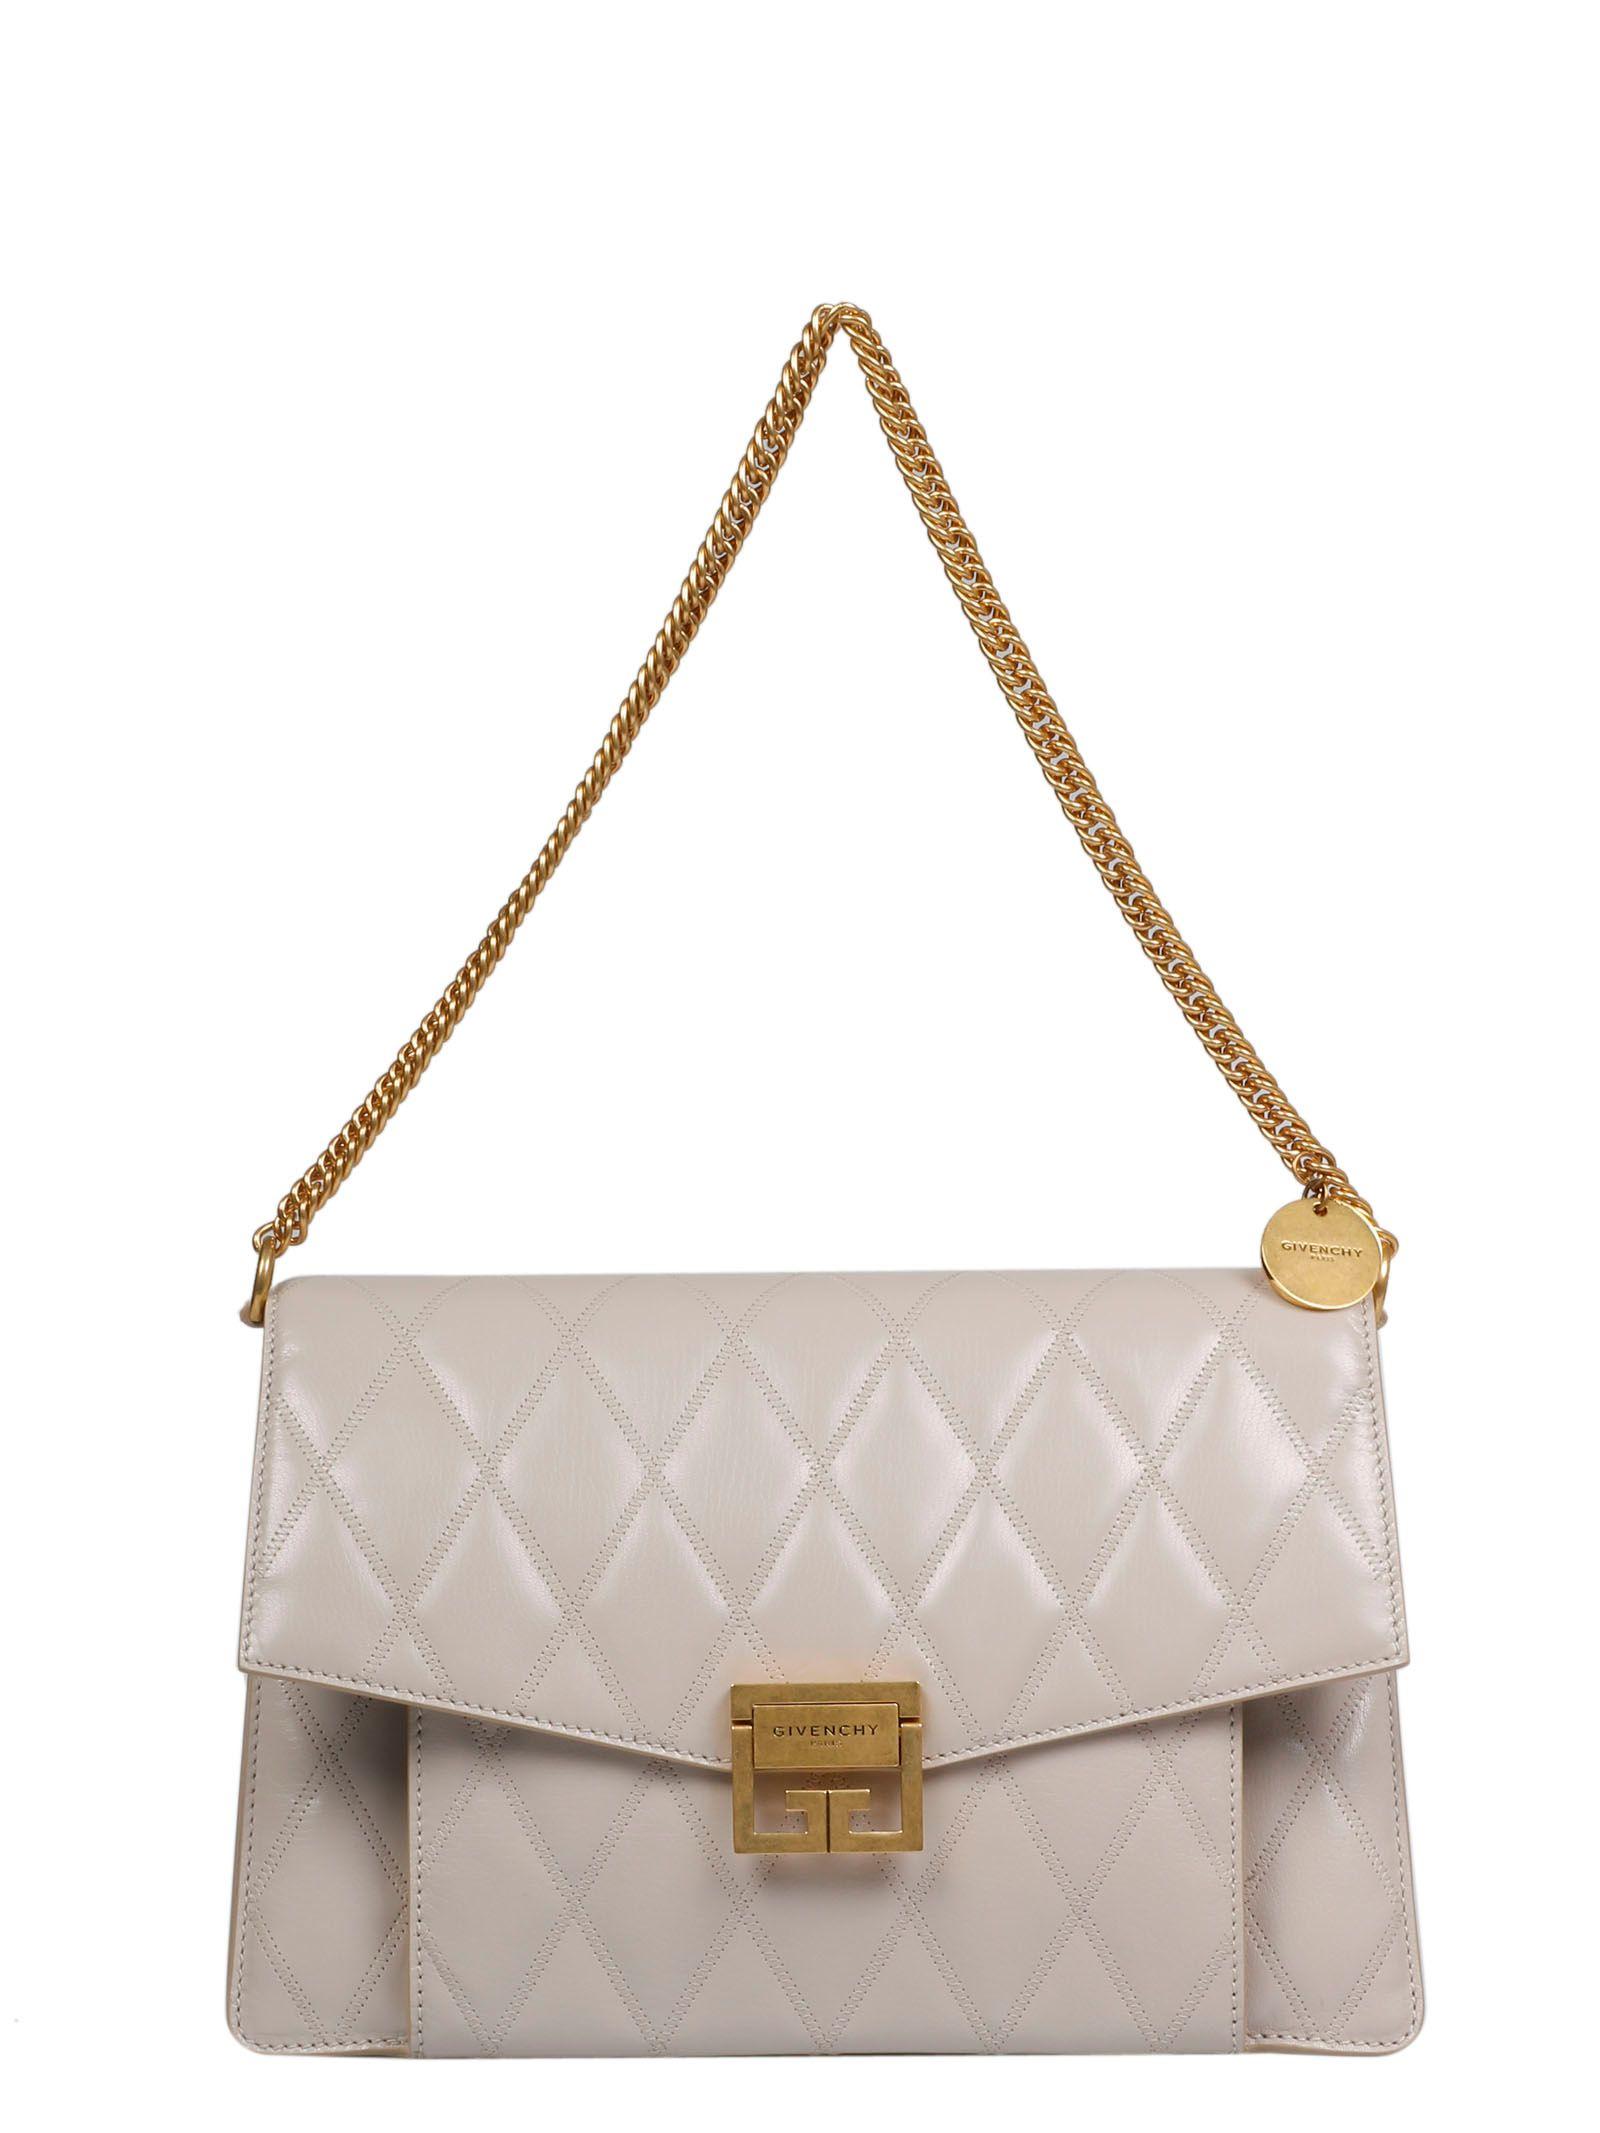 Givenchy White Leather Shoulder Bag in White - Lyst